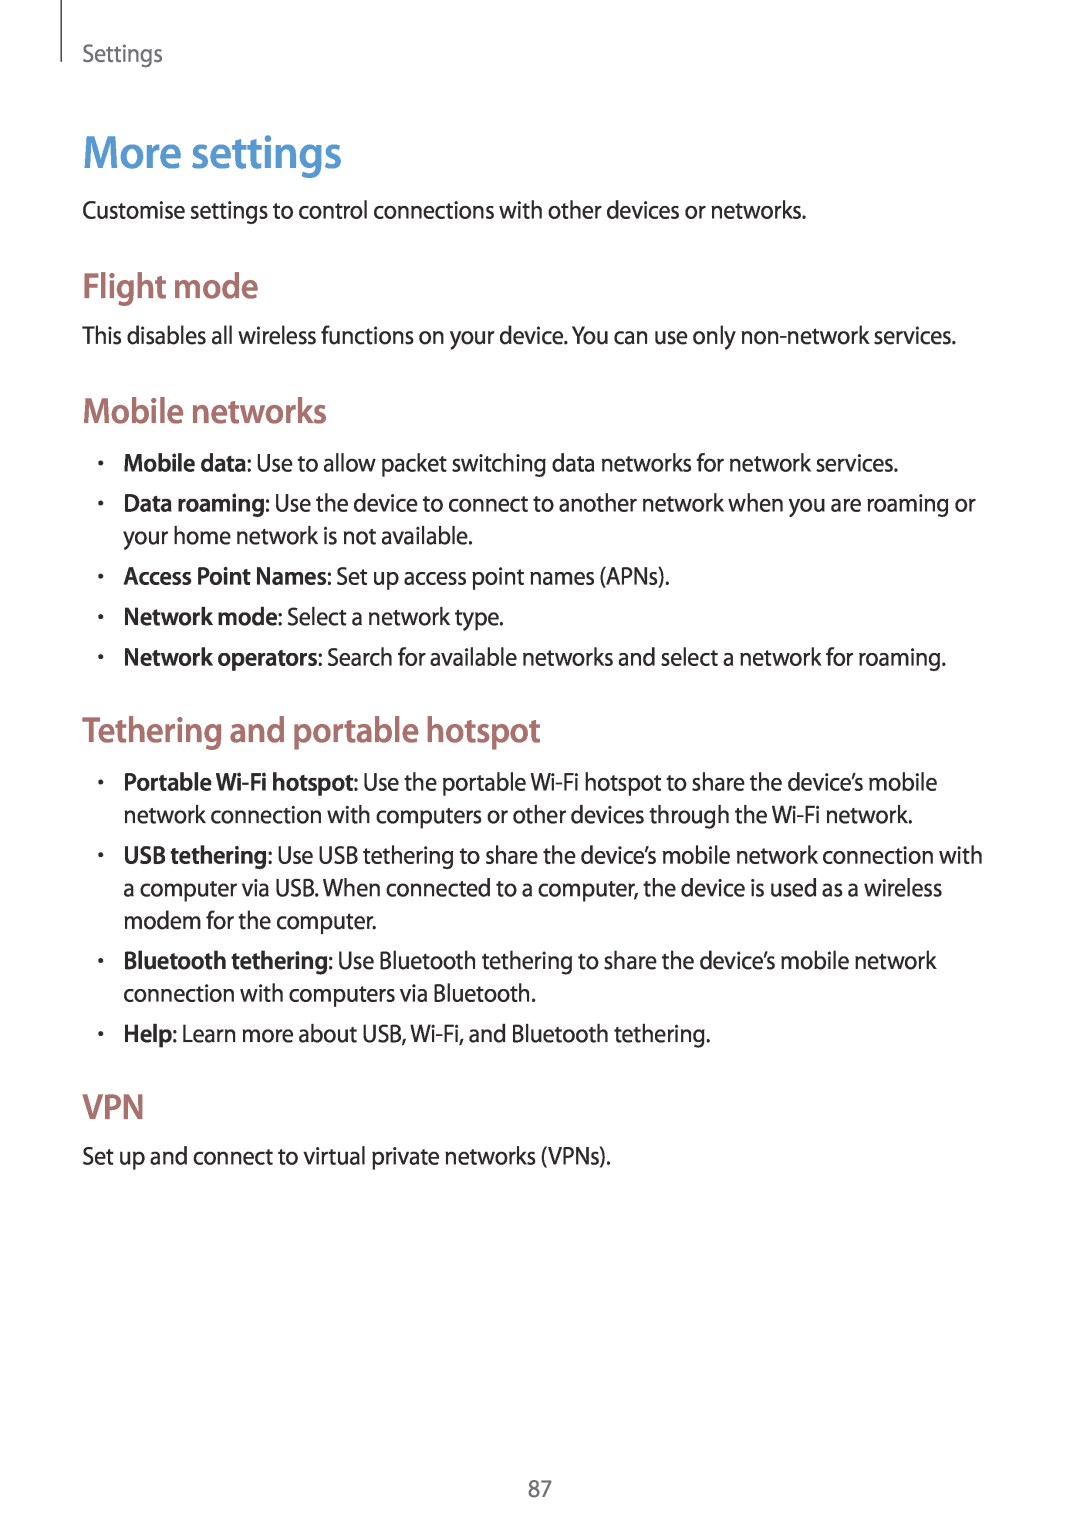 Samsung GT-S6790PWNITV manual More settings, Flight mode, Mobile networks, Tethering and portable hotspot, Settings 